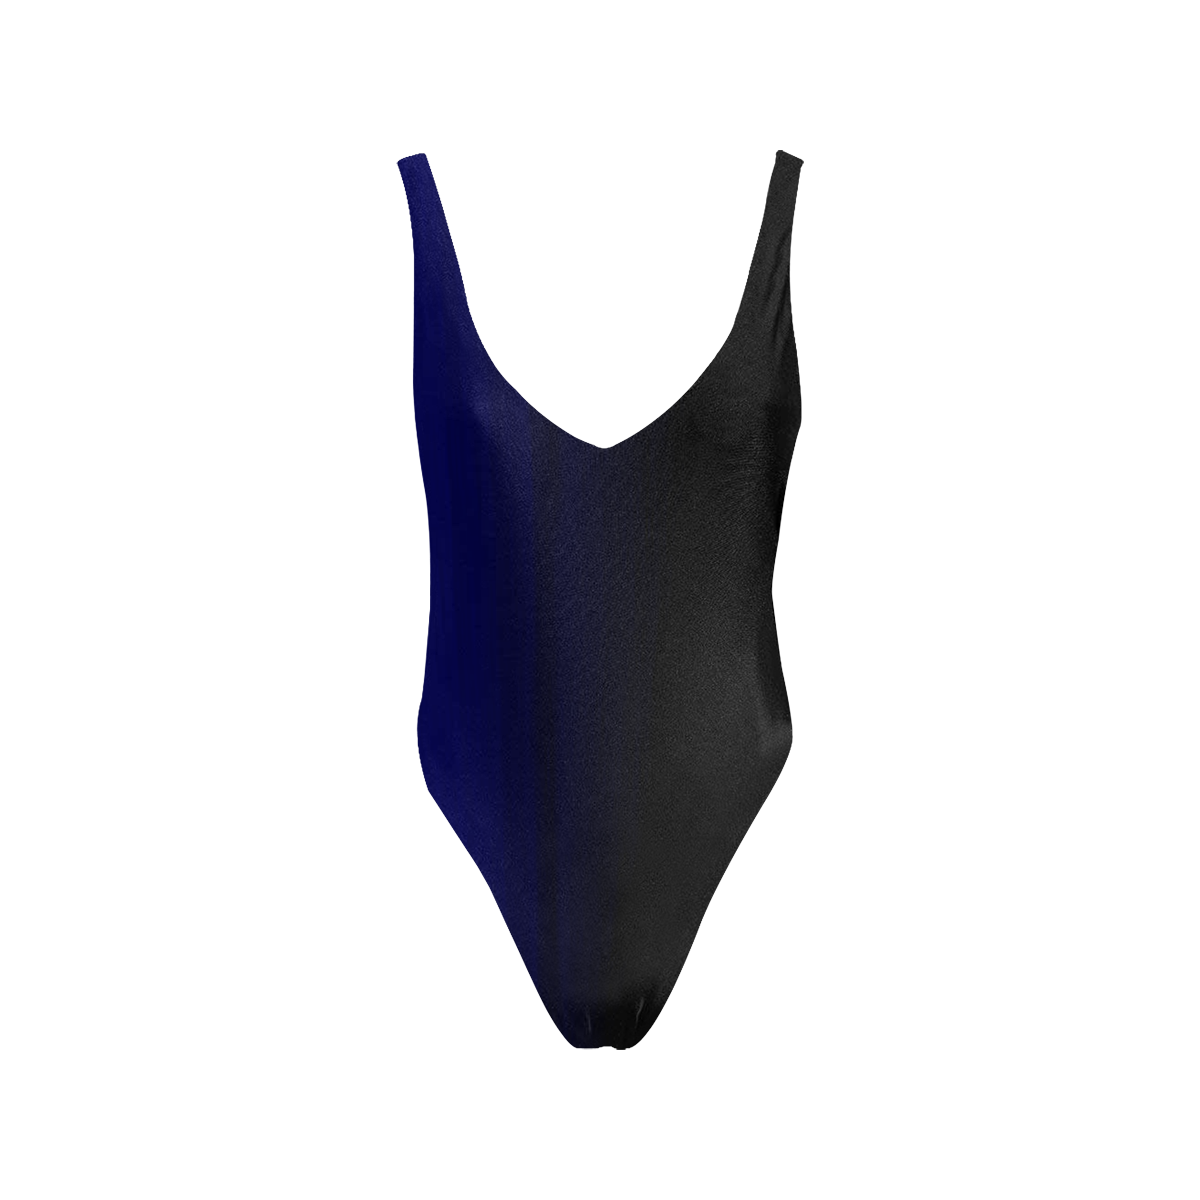 Black and blue Sexy Low Back One-Piece Swimsuit (Model S09)